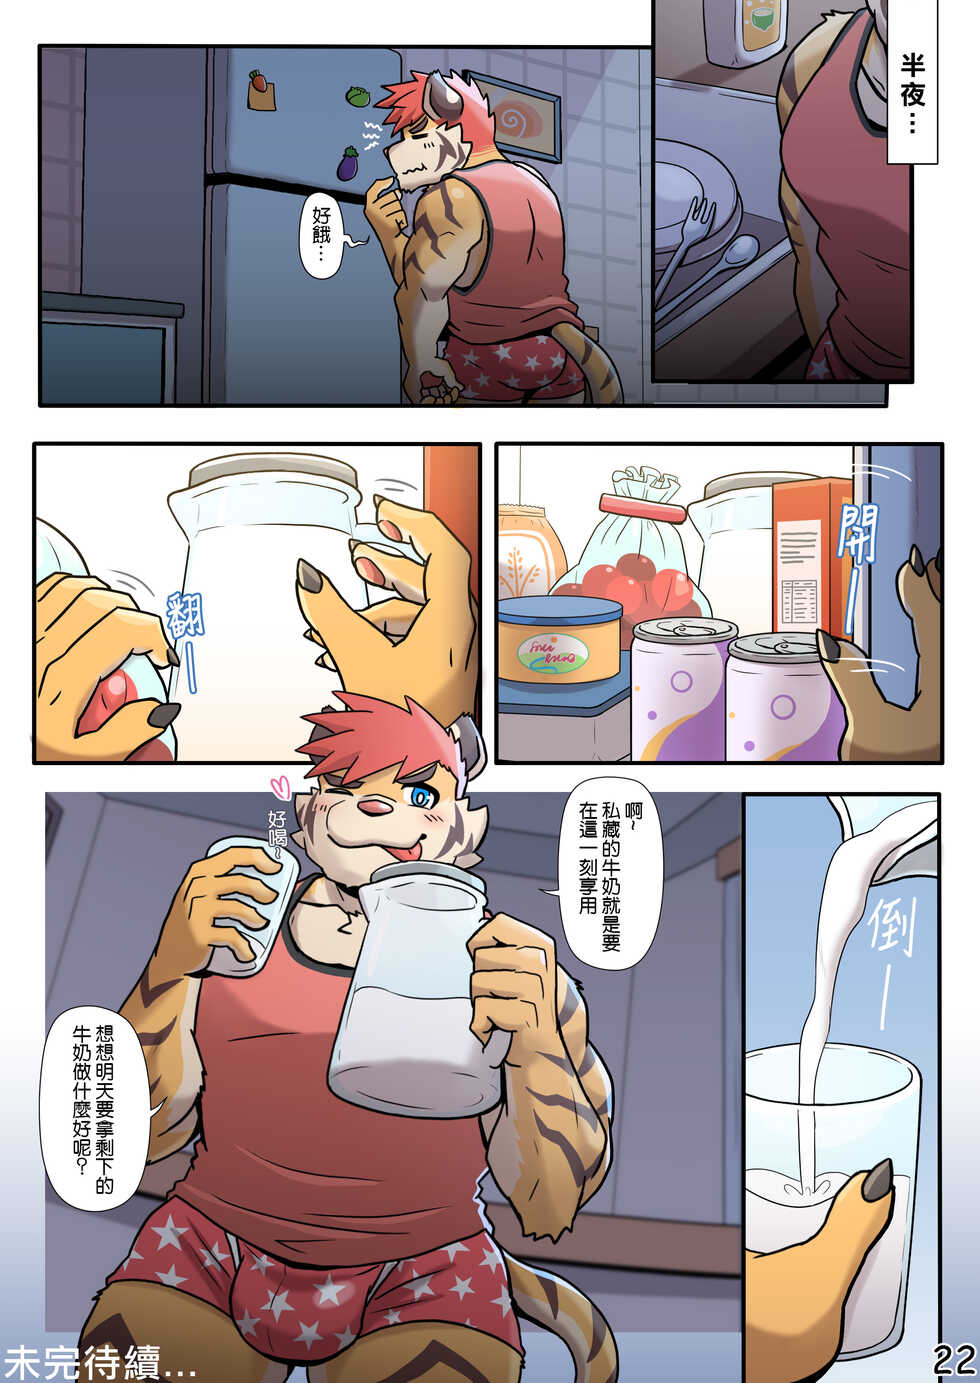 [Ripple Moon] My Milky Roomie: Homemade Pudding [Full Colors] [Chinese] - Page 23